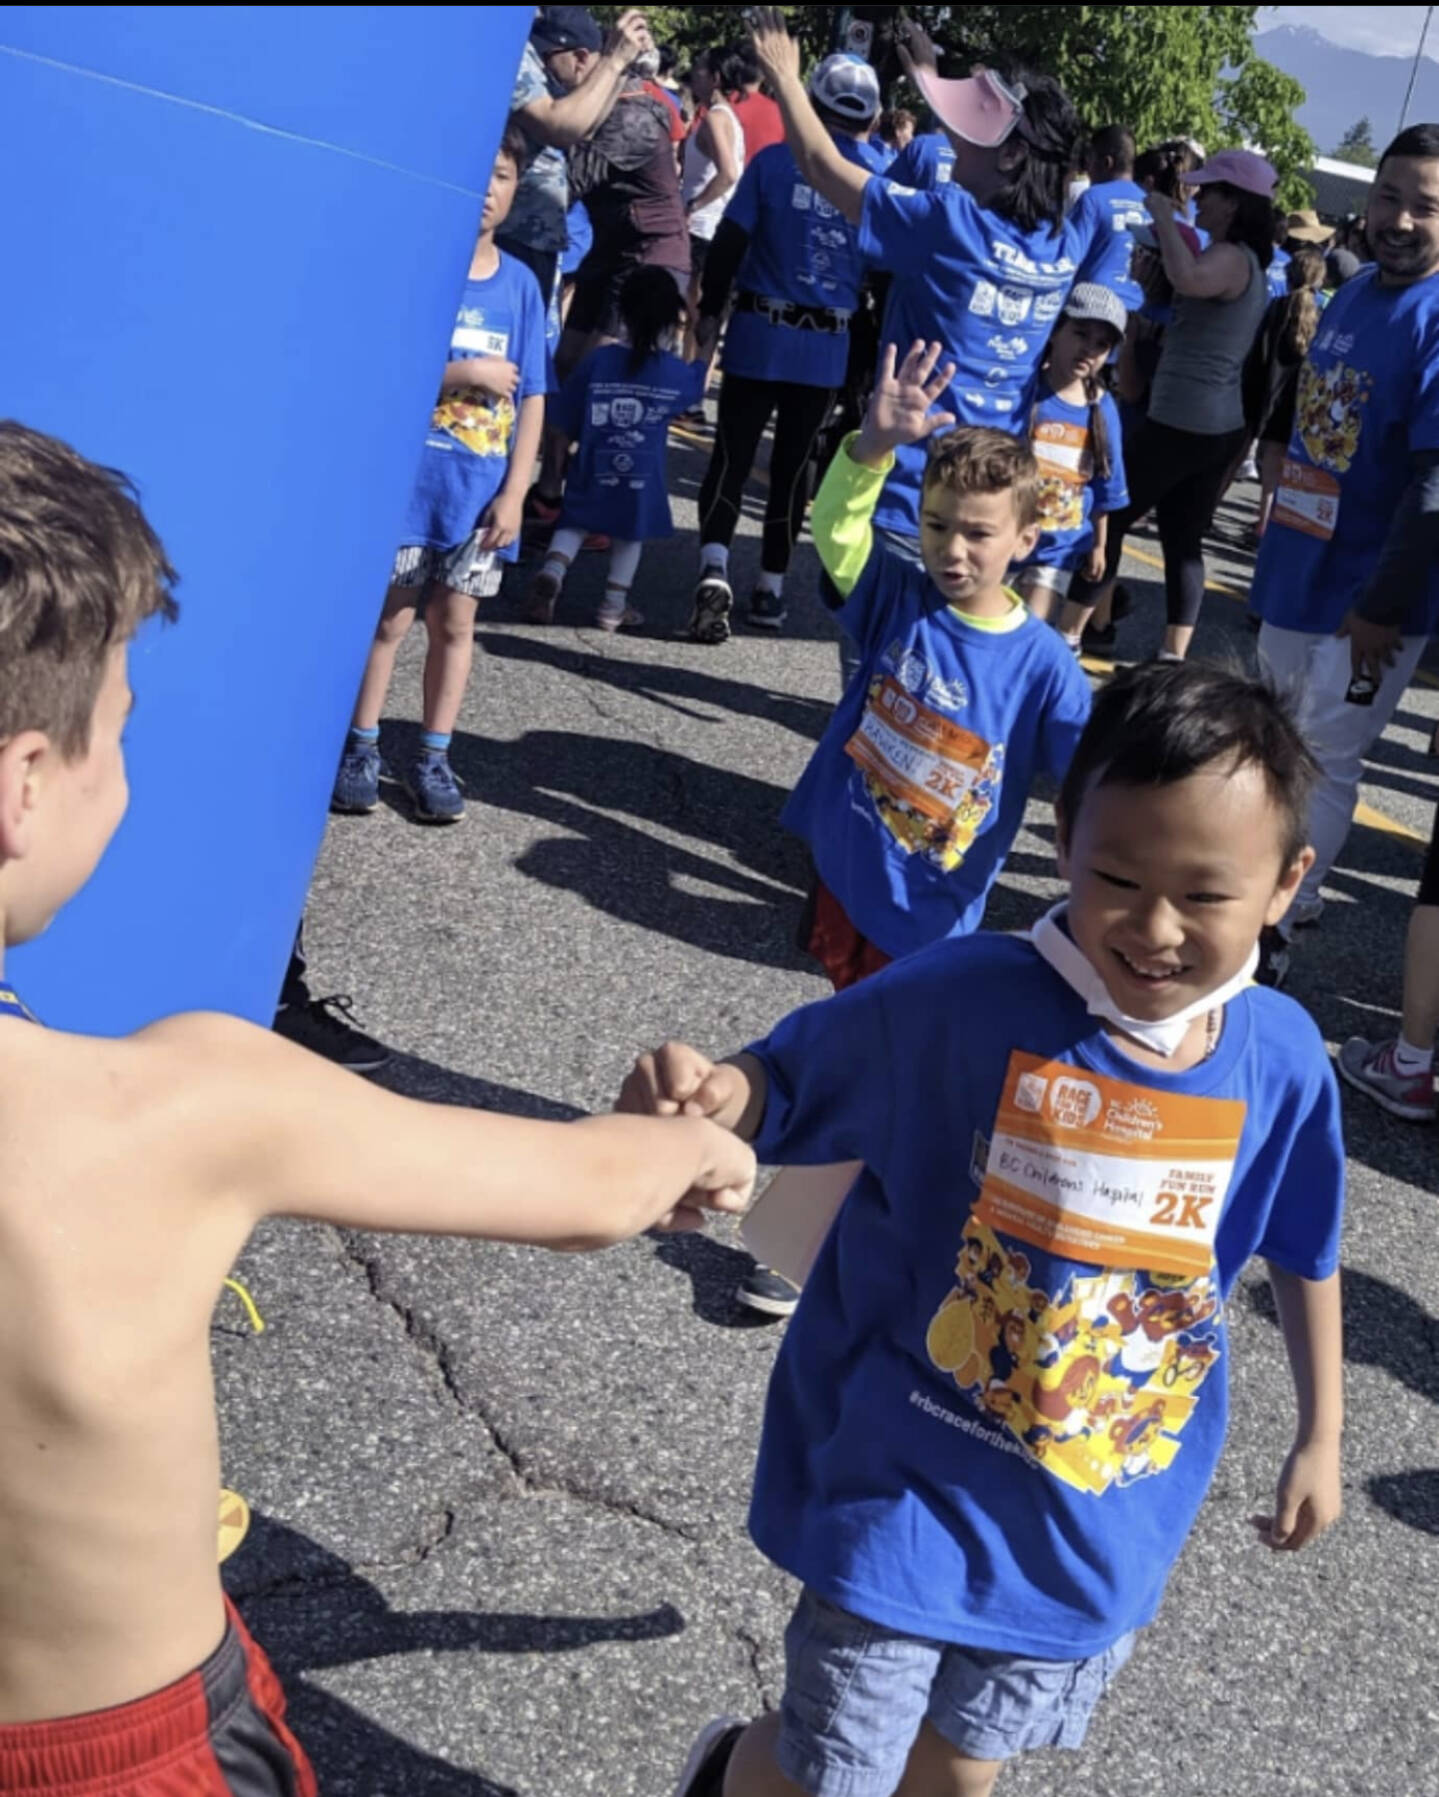 The Cannon family is taking part in the RBC Race for the Kids again this June after their eldest son's battle with cancer. Pictured is Nick Cannon, left, cheering on a family friend, who was previously diagnosed with cancer, in the 2019 race. Nick ended up being diagnosed with cancer in March 2021 and is cancer free as of September 2022. (Submitted by Kelly Cannon)